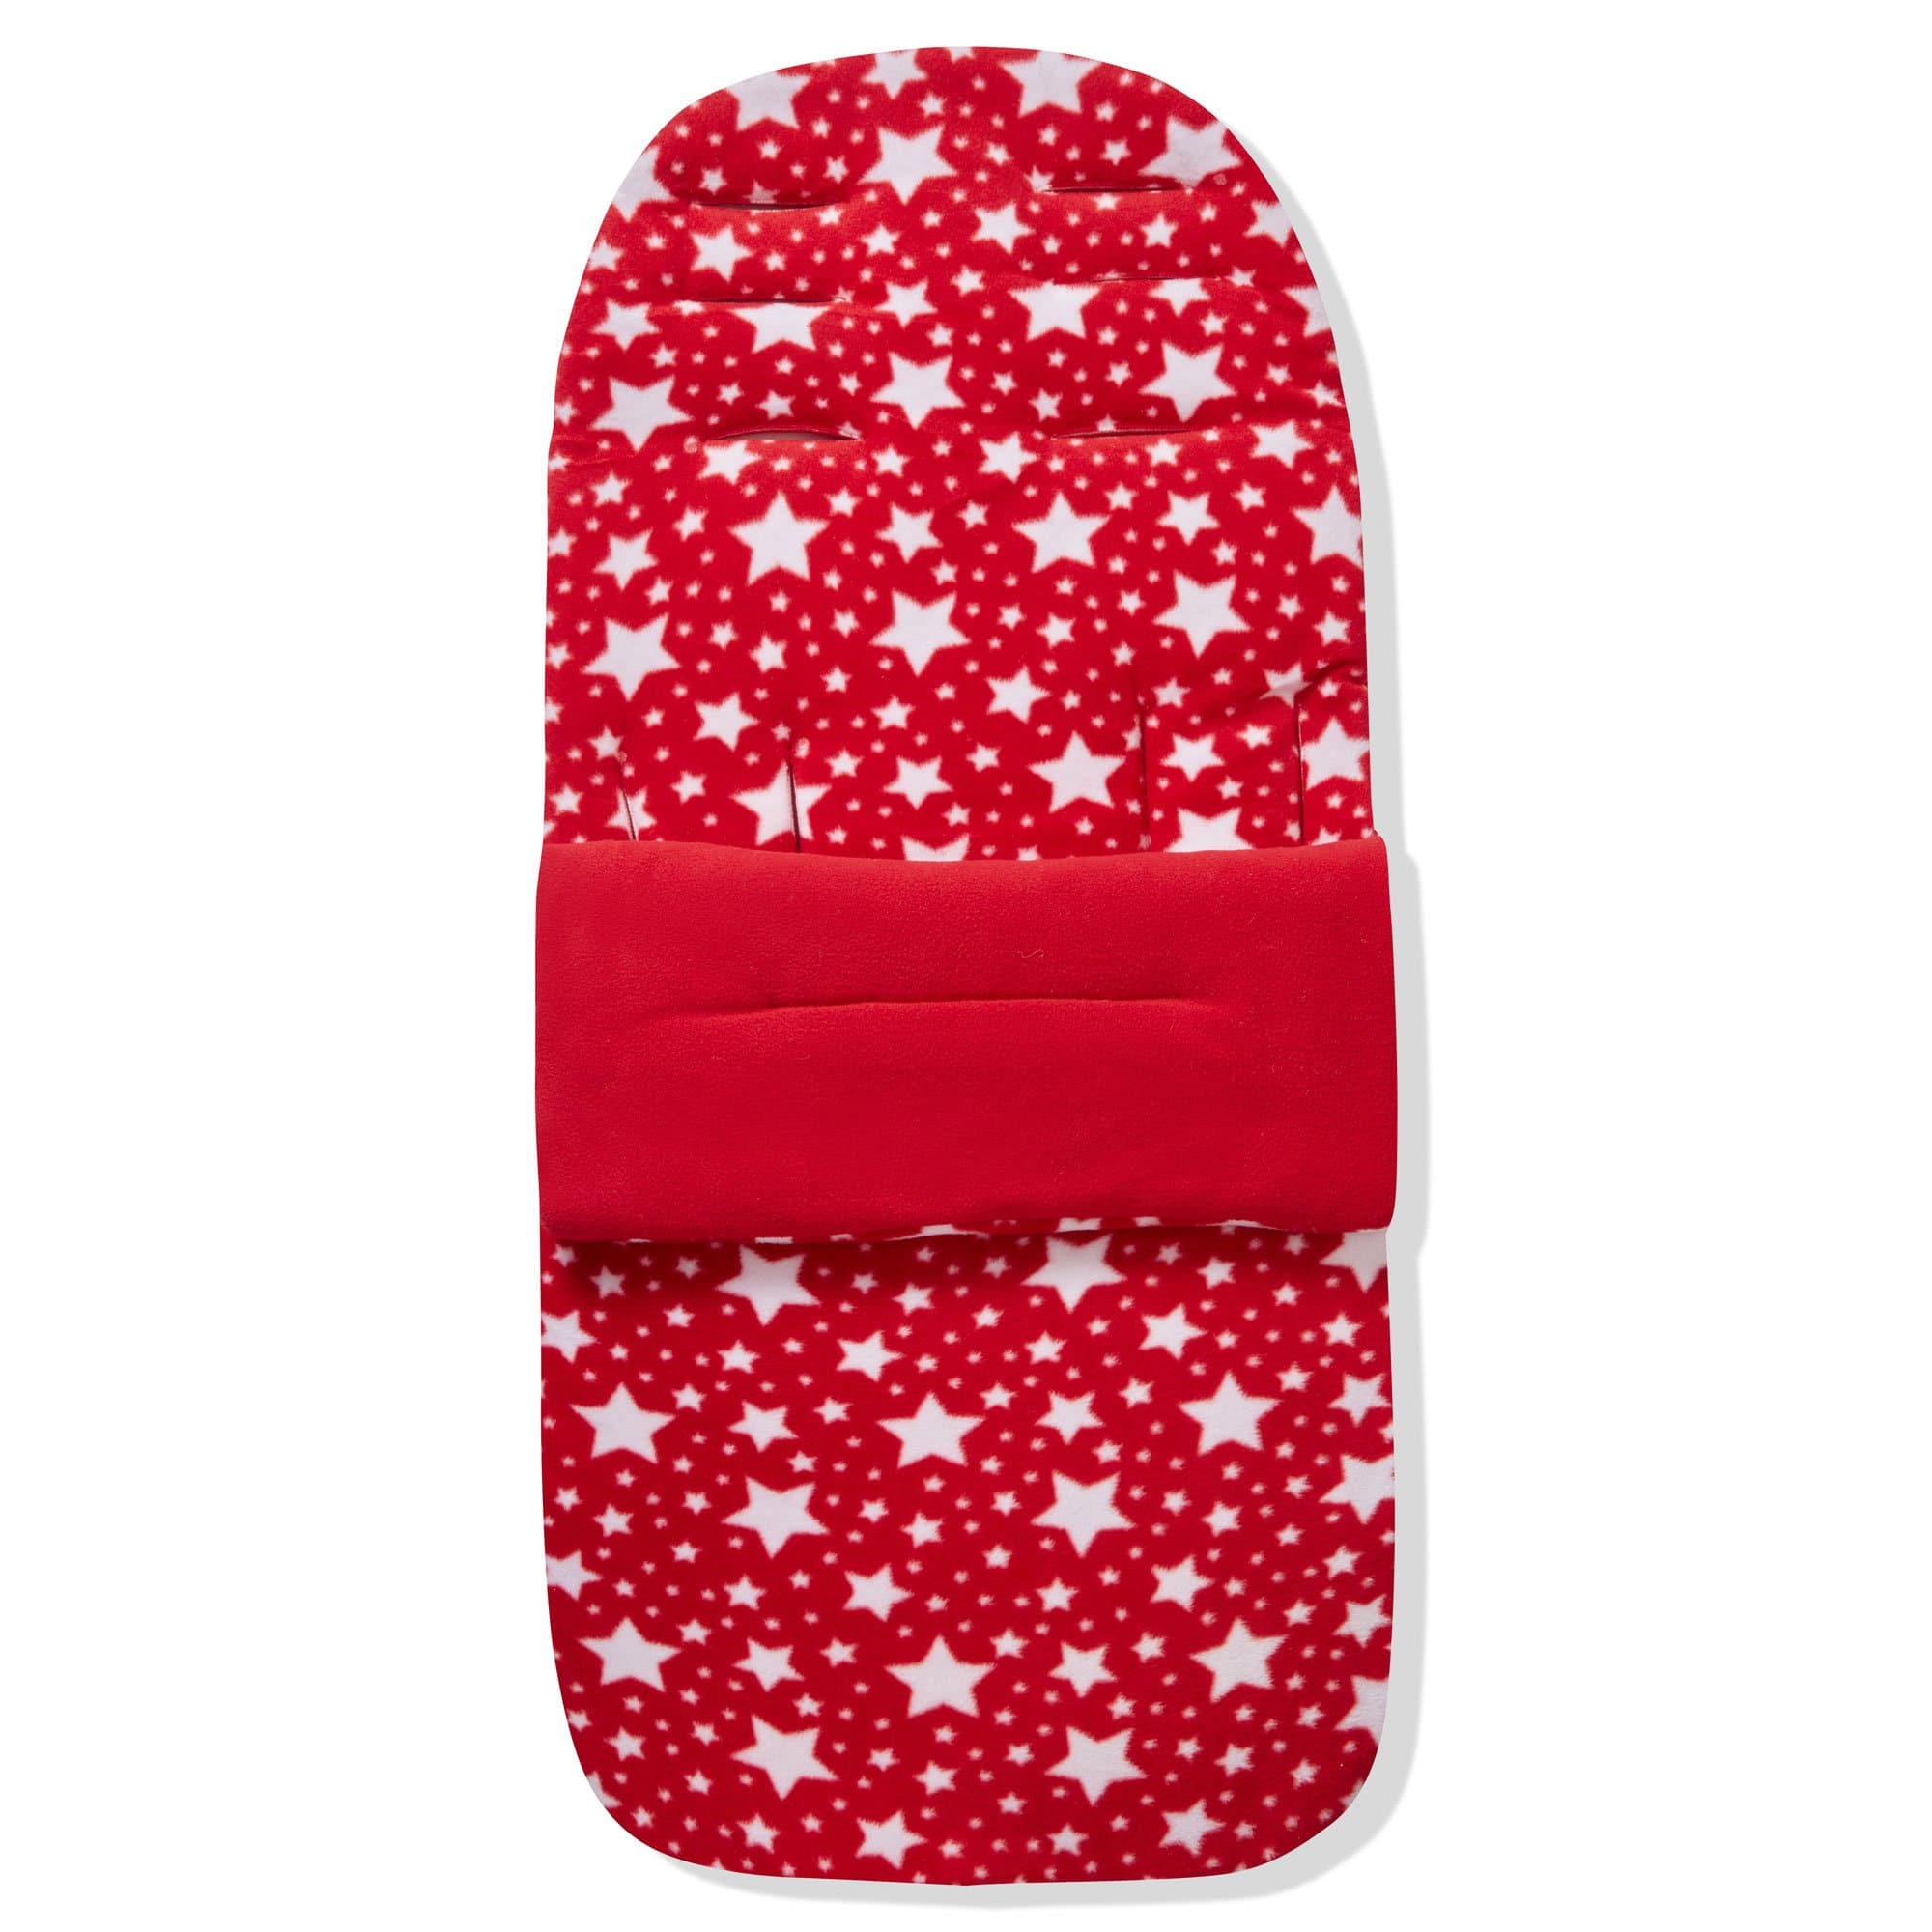 Fleece Footmuff / Cosy Toes Compatible With Baby Jogger - For Your Little One